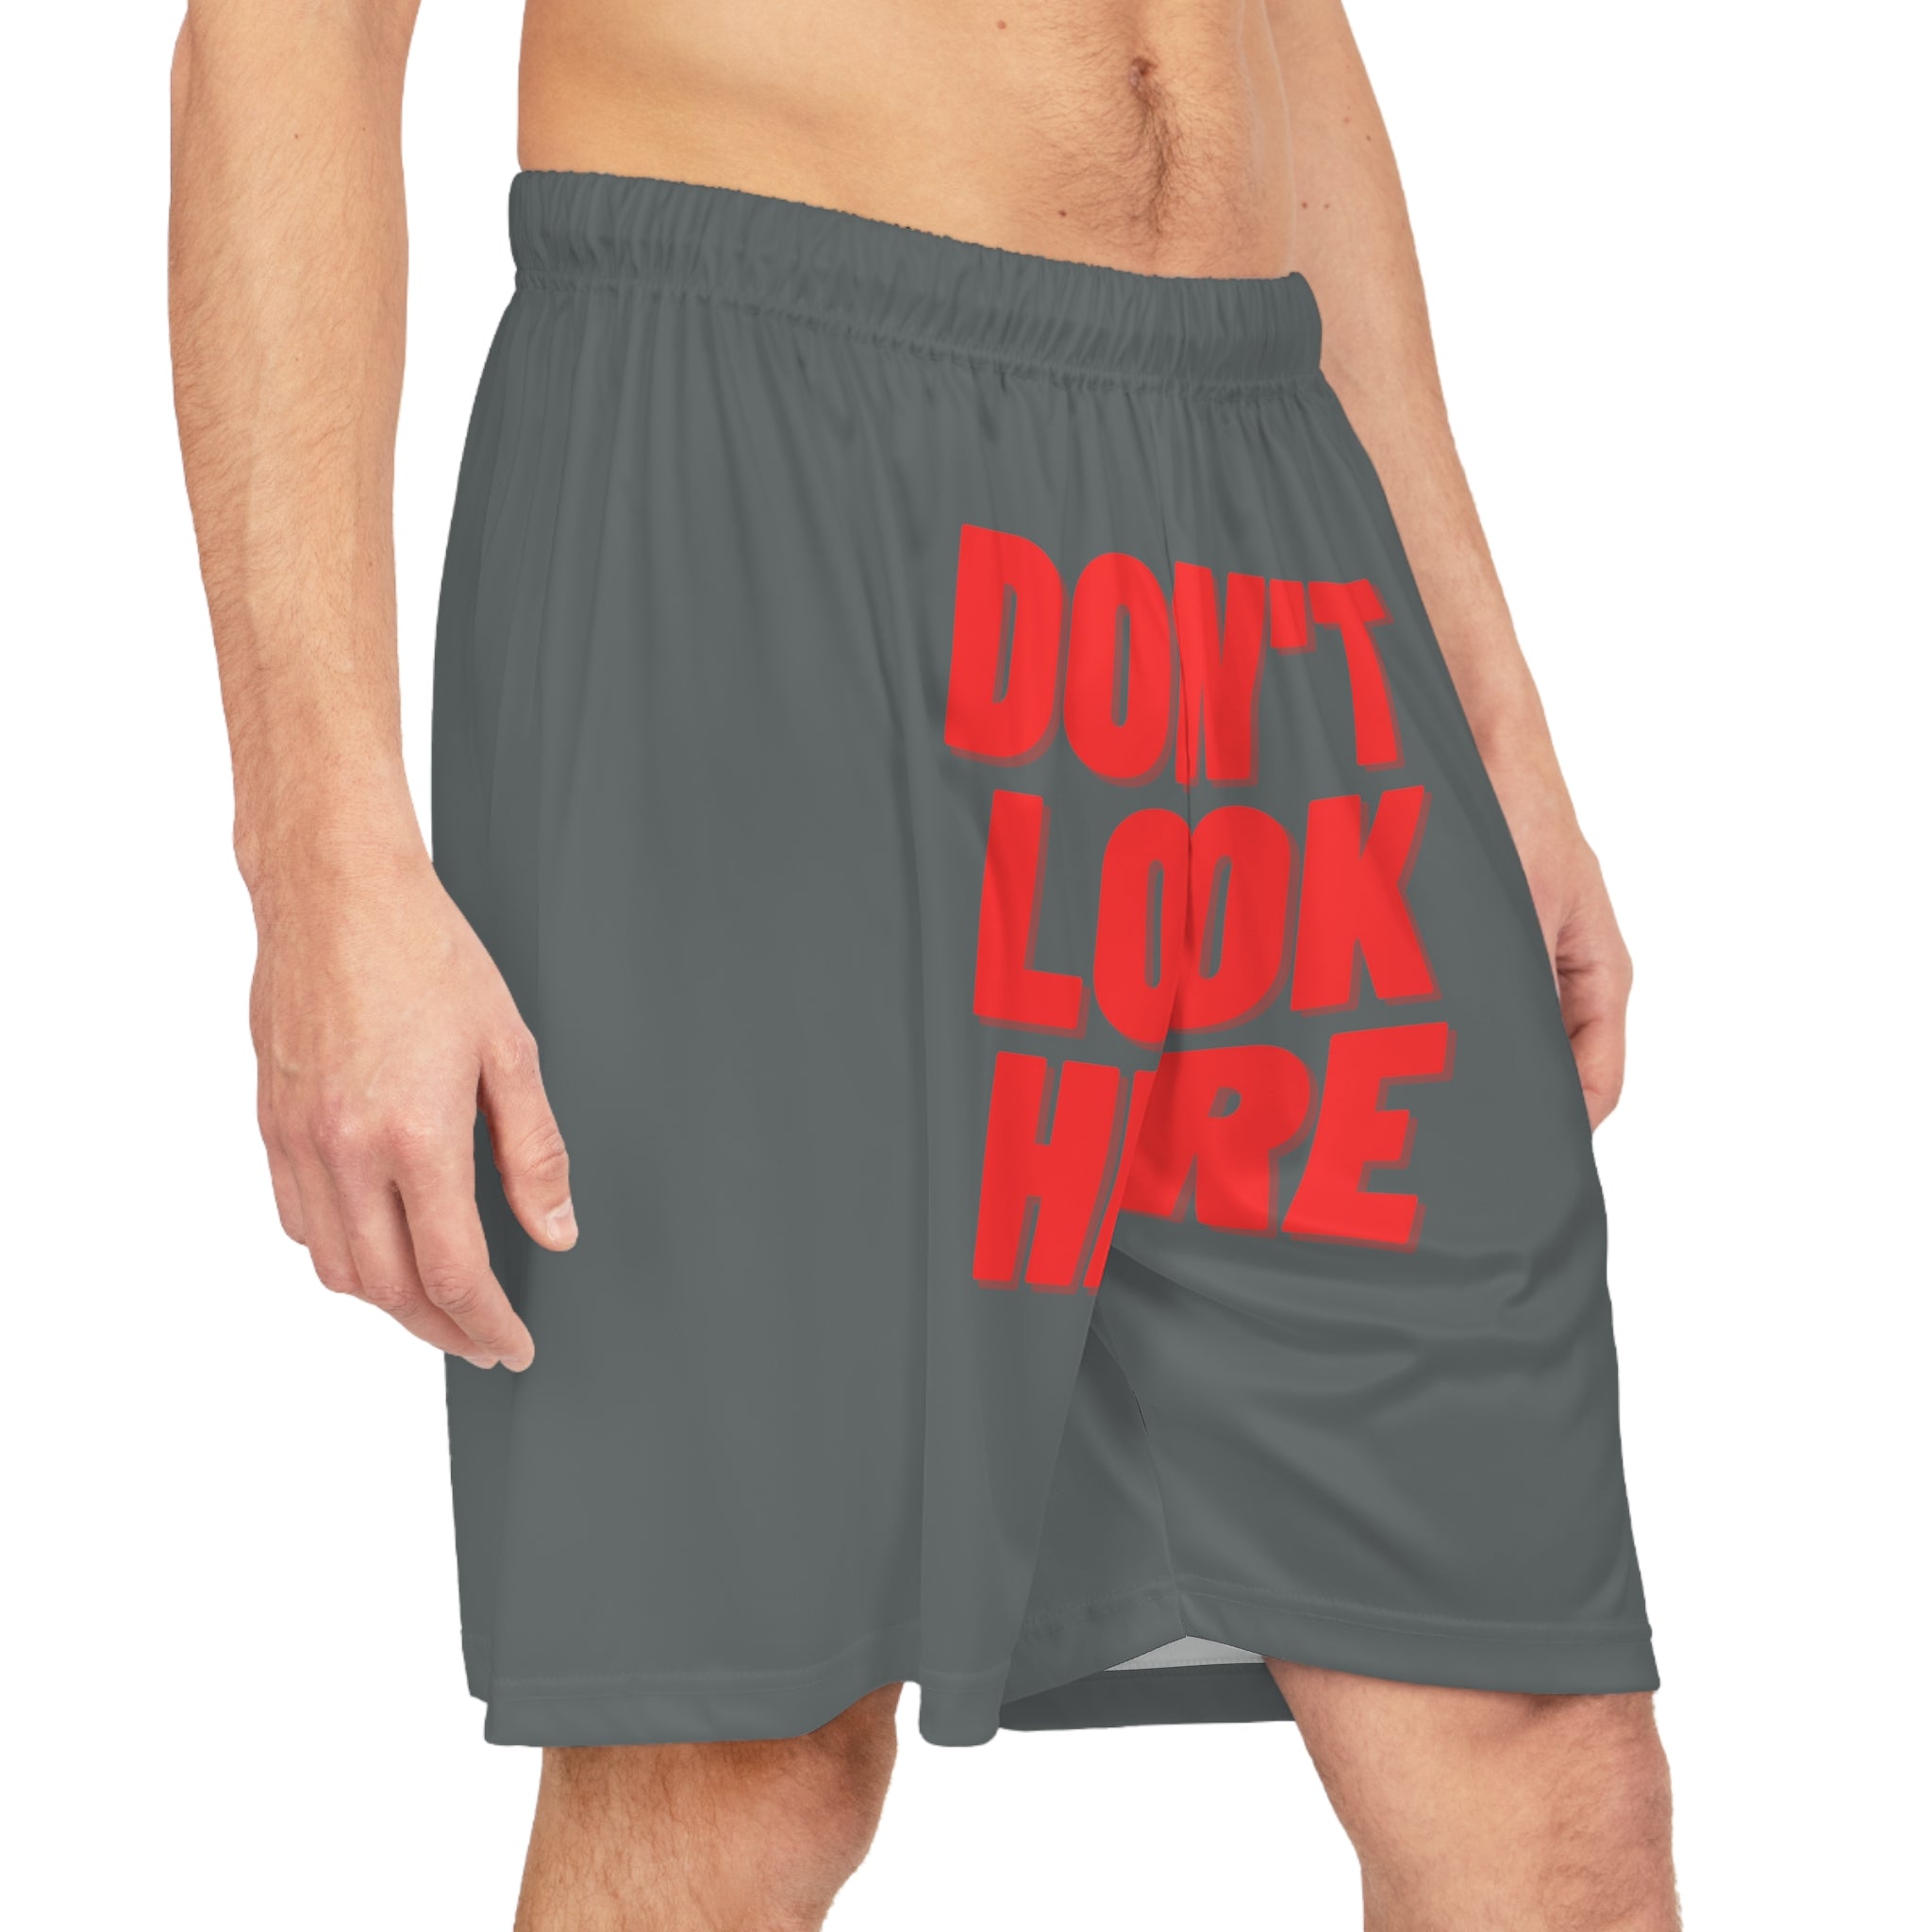 Do Not Look Here! Basketball Shorts (AOP)